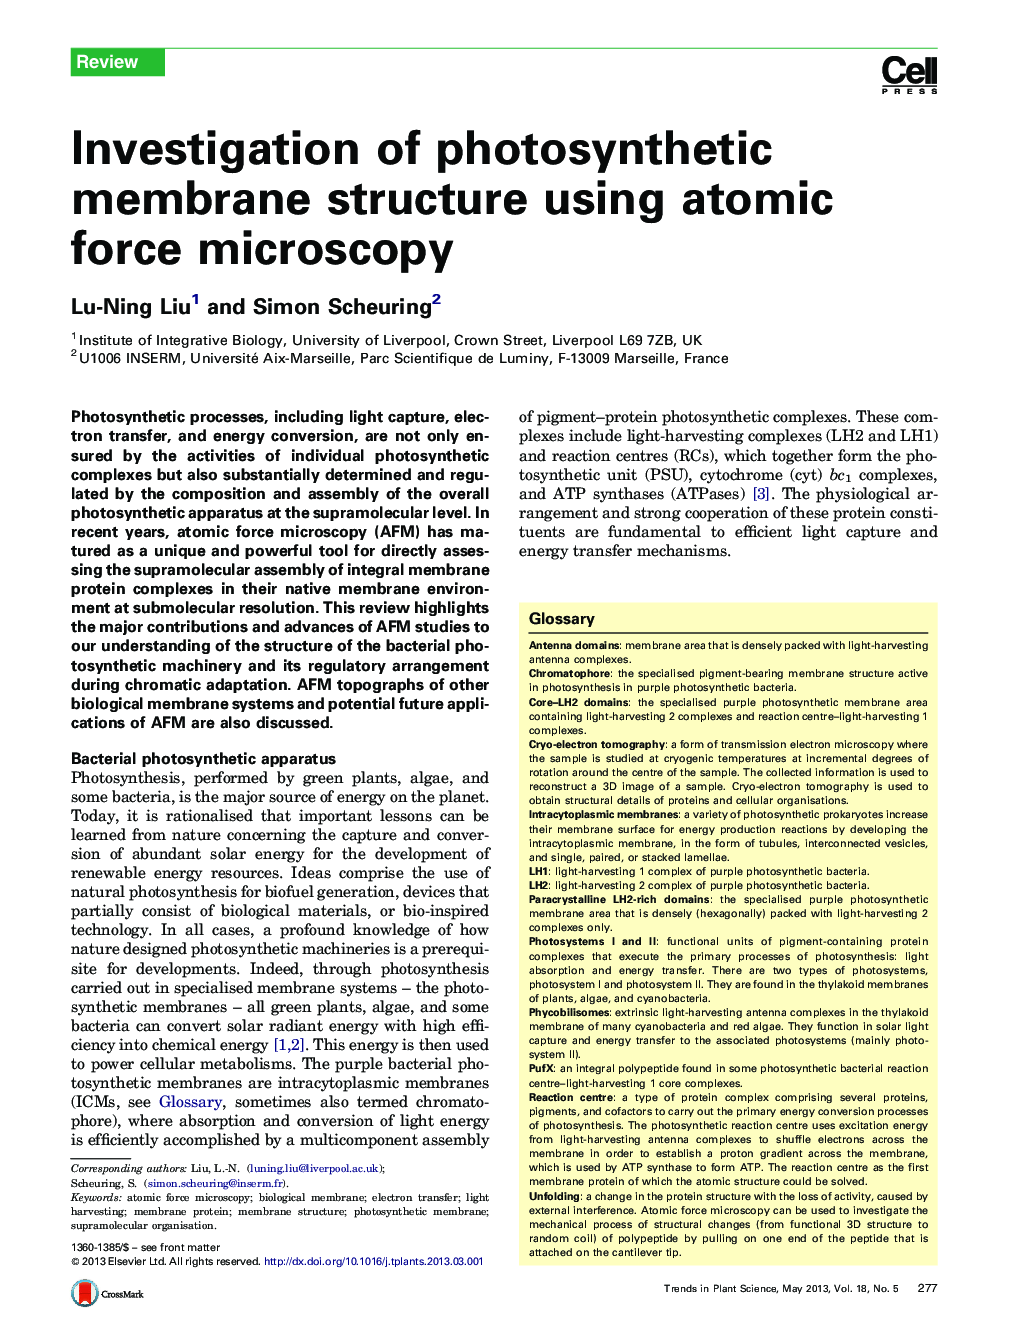 Investigation of photosynthetic membrane structure using atomic force microscopy